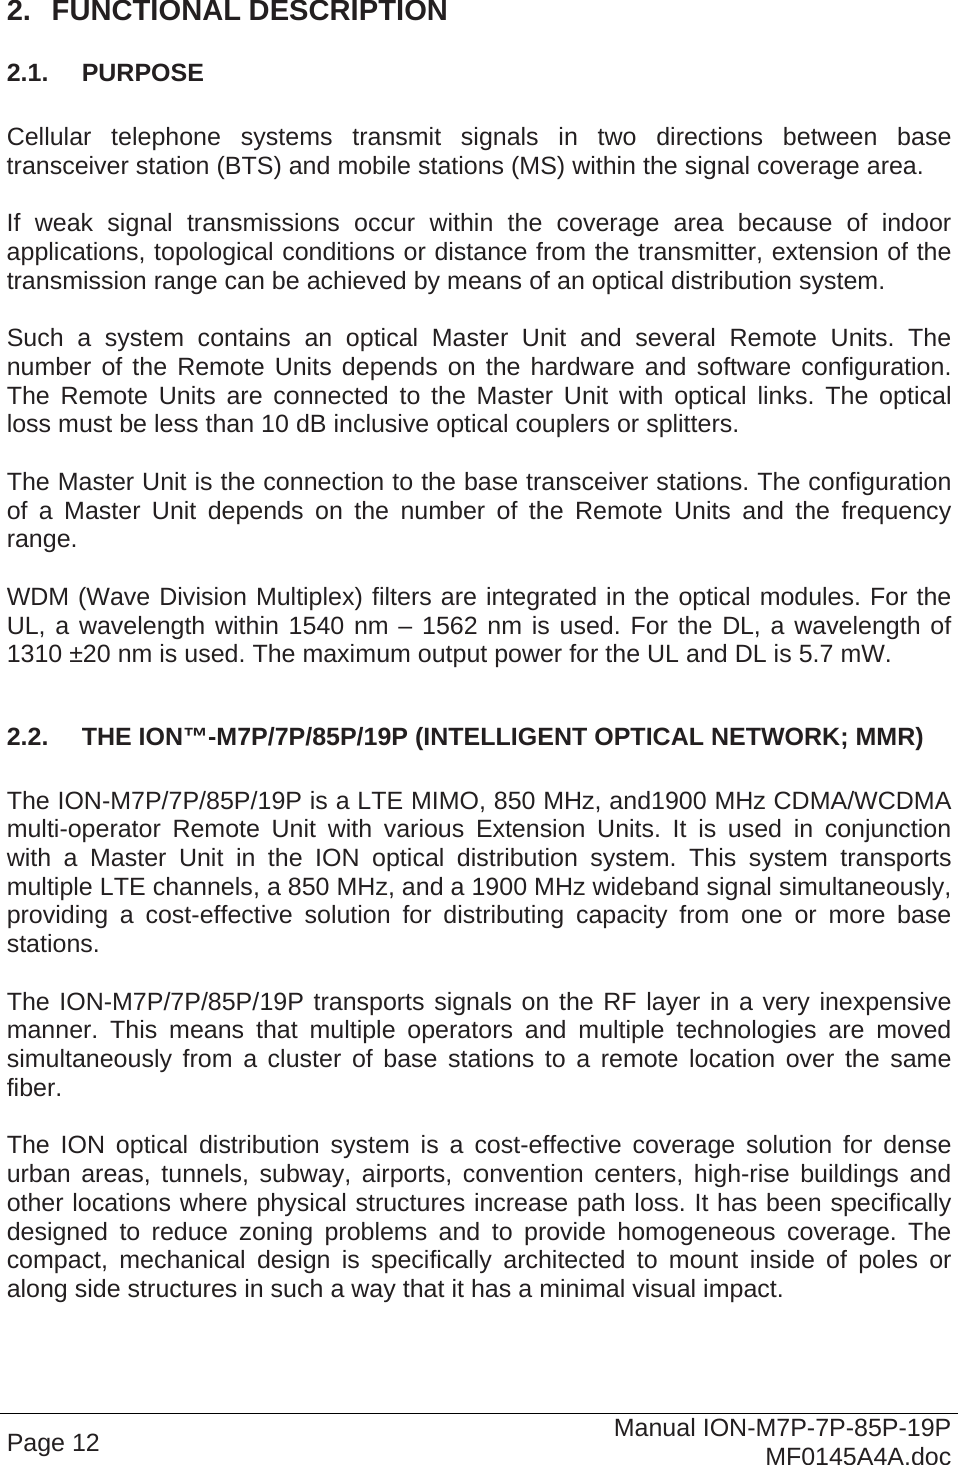  Page 12  Manual ION-M7P-7P-85P-19P MF0145A4A.doc 2.  FUNCTIONAL DESCRIPTION 2.1.  PURPOSE  Cellular telephone systems transmit signals in two directions between base transceiver station (BTS) and mobile stations (MS) within the signal coverage area.  If weak signal transmissions occur within the coverage area because of indoor applications, topological conditions or distance from the transmitter, extension of the transmission range can be achieved by means of an optical distribution system.  Such a system contains an optical Master Unit and several Remote Units. The number of the Remote Units depends on the hardware and software configuration. The Remote Units are connected to the Master Unit with optical links. The optical loss must be less than 10 dB inclusive optical couplers or splitters.  The Master Unit is the connection to the base transceiver stations. The configuration of a Master Unit depends on the number of the Remote Units and the frequency range.   WDM (Wave Division Multiplex) filters are integrated in the optical modules. For the UL, a wavelength within 1540 nm – 1562 nm is used. For the DL, a wavelength of 1310 ±20 nm is used. The maximum output power for the UL and DL is 5.7 mW.  2.2.  THE ION™-M7P/7P/85P/19P (INTELLIGENT OPTICAL NETWORK; MMR)  The ION-M7P/7P/85P/19P is a LTE MIMO, 850 MHz, and1900 MHz CDMA/WCDMA multi-operator Remote Unit with various Extension Units. It is used in conjunction with a Master Unit in the ION optical distribution system. This system transports multiple LTE channels, a 850 MHz, and a 1900 MHz wideband signal simultaneously, providing a cost-effective solution for distributing capacity from one or more base stations.  The ION-M7P/7P/85P/19P transports signals on the RF layer in a very inexpensive manner. This means that multiple operators and multiple technologies are moved simultaneously from a cluster of base stations to a remote location over the same fiber.  The ION optical distribution system is a cost-effective coverage solution for dense urban areas, tunnels, subway, airports, convention centers, high-rise buildings and other locations where physical structures increase path loss. It has been specifically designed to reduce zoning problems and to provide homogeneous coverage. The compact, mechanical design is specifically architected to mount inside of poles or along side structures in such a way that it has a minimal visual impact.  